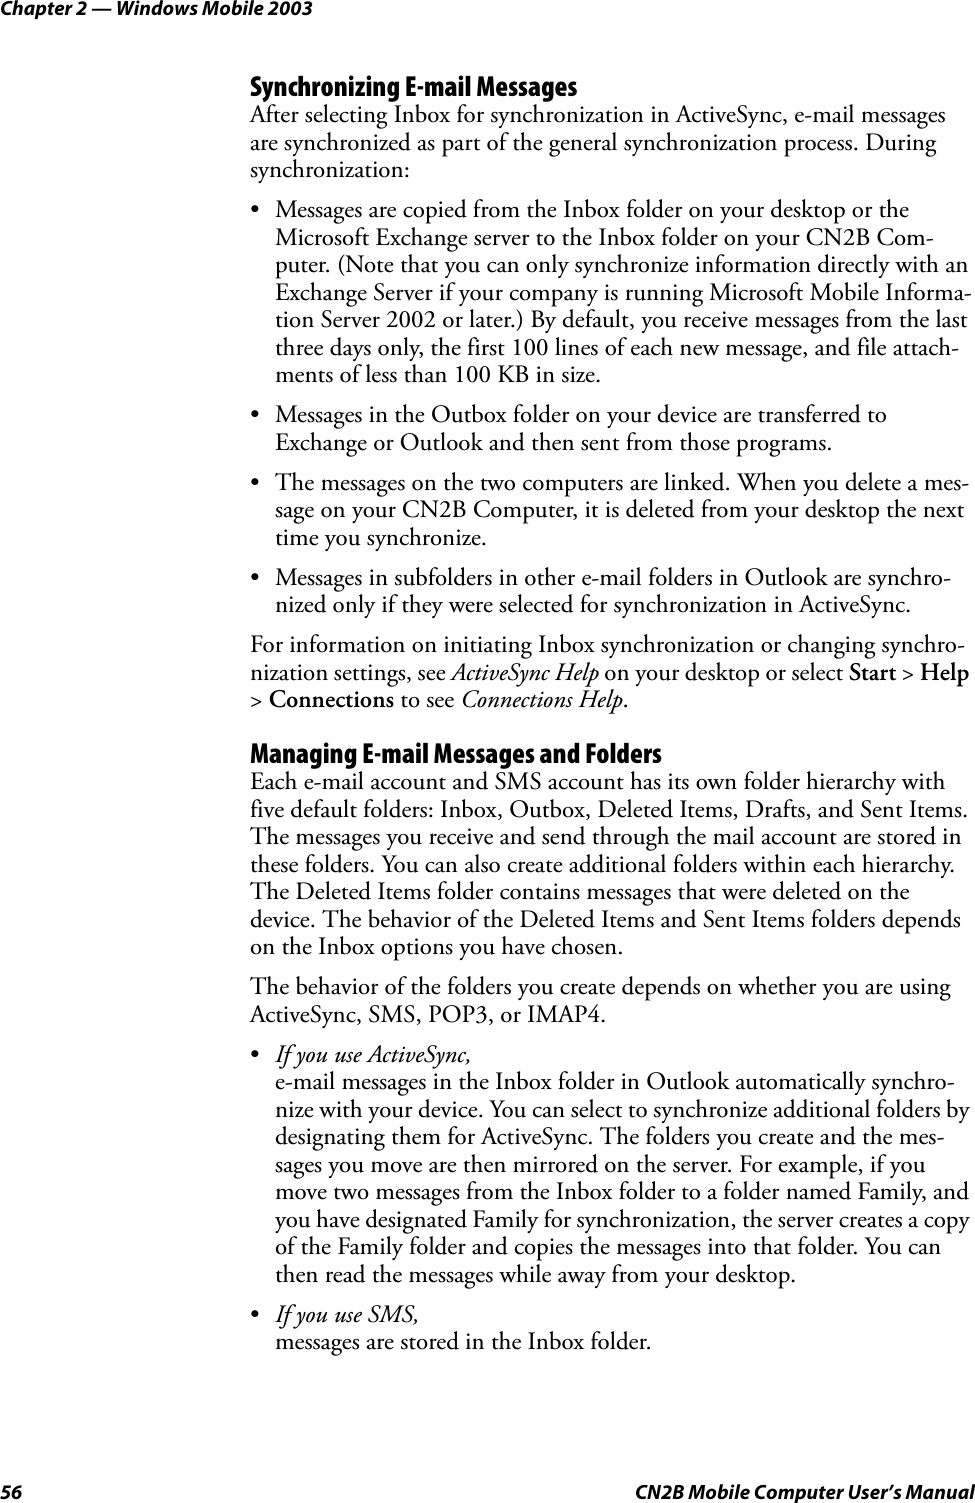 Chapter 2 — Windows Mobile 200356 CN2B Mobile Computer User’s ManualSynchronizing E-mail MessagesAfter selecting Inbox for synchronization in ActiveSync, e-mail messages are synchronized as part of the general synchronization process. During synchronization:• Messages are copied from the Inbox folder on your desktop or the Microsoft Exchange server to the Inbox folder on your CN2B Com-puter. (Note that you can only synchronize information directly with an Exchange Server if your company is running Microsoft Mobile Informa-tion Server 2002 or later.) By default, you receive messages from the last three days only, the first 100 lines of each new message, and file attach-ments of less than 100 KB in size.• Messages in the Outbox folder on your device are transferred to Exchange or Outlook and then sent from those programs.• The messages on the two computers are linked. When you delete a mes-sage on your CN2B Computer, it is deleted from your desktop the next time you synchronize.• Messages in subfolders in other e-mail folders in Outlook are synchro-nized only if they were selected for synchronization in ActiveSync.For information on initiating Inbox synchronization or changing synchro-nization settings, see ActiveSync Help on your desktop or select Start &gt; Help &gt; Connections to see Connections Help.Managing E-mail Messages and FoldersEach e-mail account and SMS account has its own folder hierarchy with five default folders: Inbox, Outbox, Deleted Items, Drafts, and Sent Items. The messages you receive and send through the mail account are stored in these folders. You can also create additional folders within each hierarchy. The Deleted Items folder contains messages that were deleted on the device. The behavior of the Deleted Items and Sent Items folders depends on the Inbox options you have chosen.The behavior of the folders you create depends on whether you are using ActiveSync, SMS, POP3, or IMAP4.•If you use ActiveSync, e-mail messages in the Inbox folder in Outlook automatically synchro-nize with your device. You can select to synchronize additional folders by designating them for ActiveSync. The folders you create and the mes-sages you move are then mirrored on the server. For example, if you move two messages from the Inbox folder to a folder named Family, and you have designated Family for synchronization, the server creates a copy of the Family folder and copies the messages into that folder. You can then read the messages while away from your desktop.•If you use SMS, messages are stored in the Inbox folder.